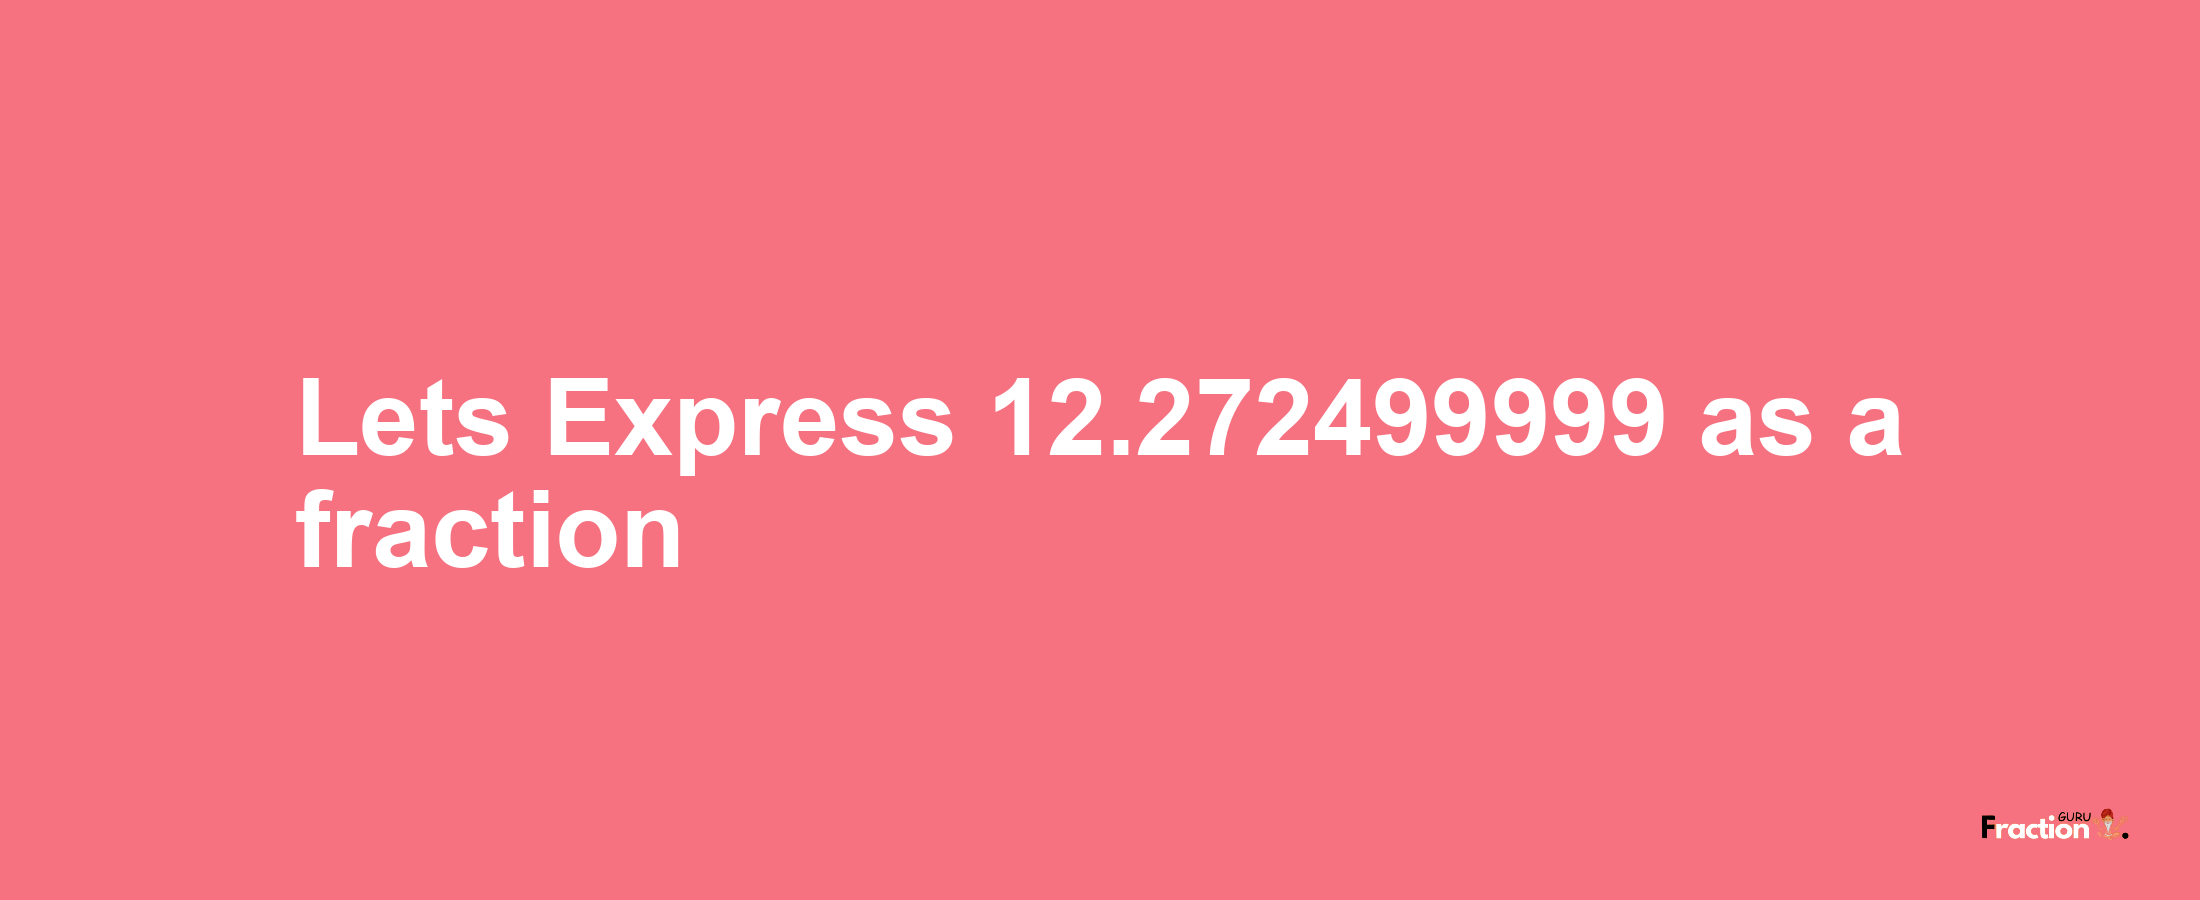 Lets Express 12.272499999 as afraction